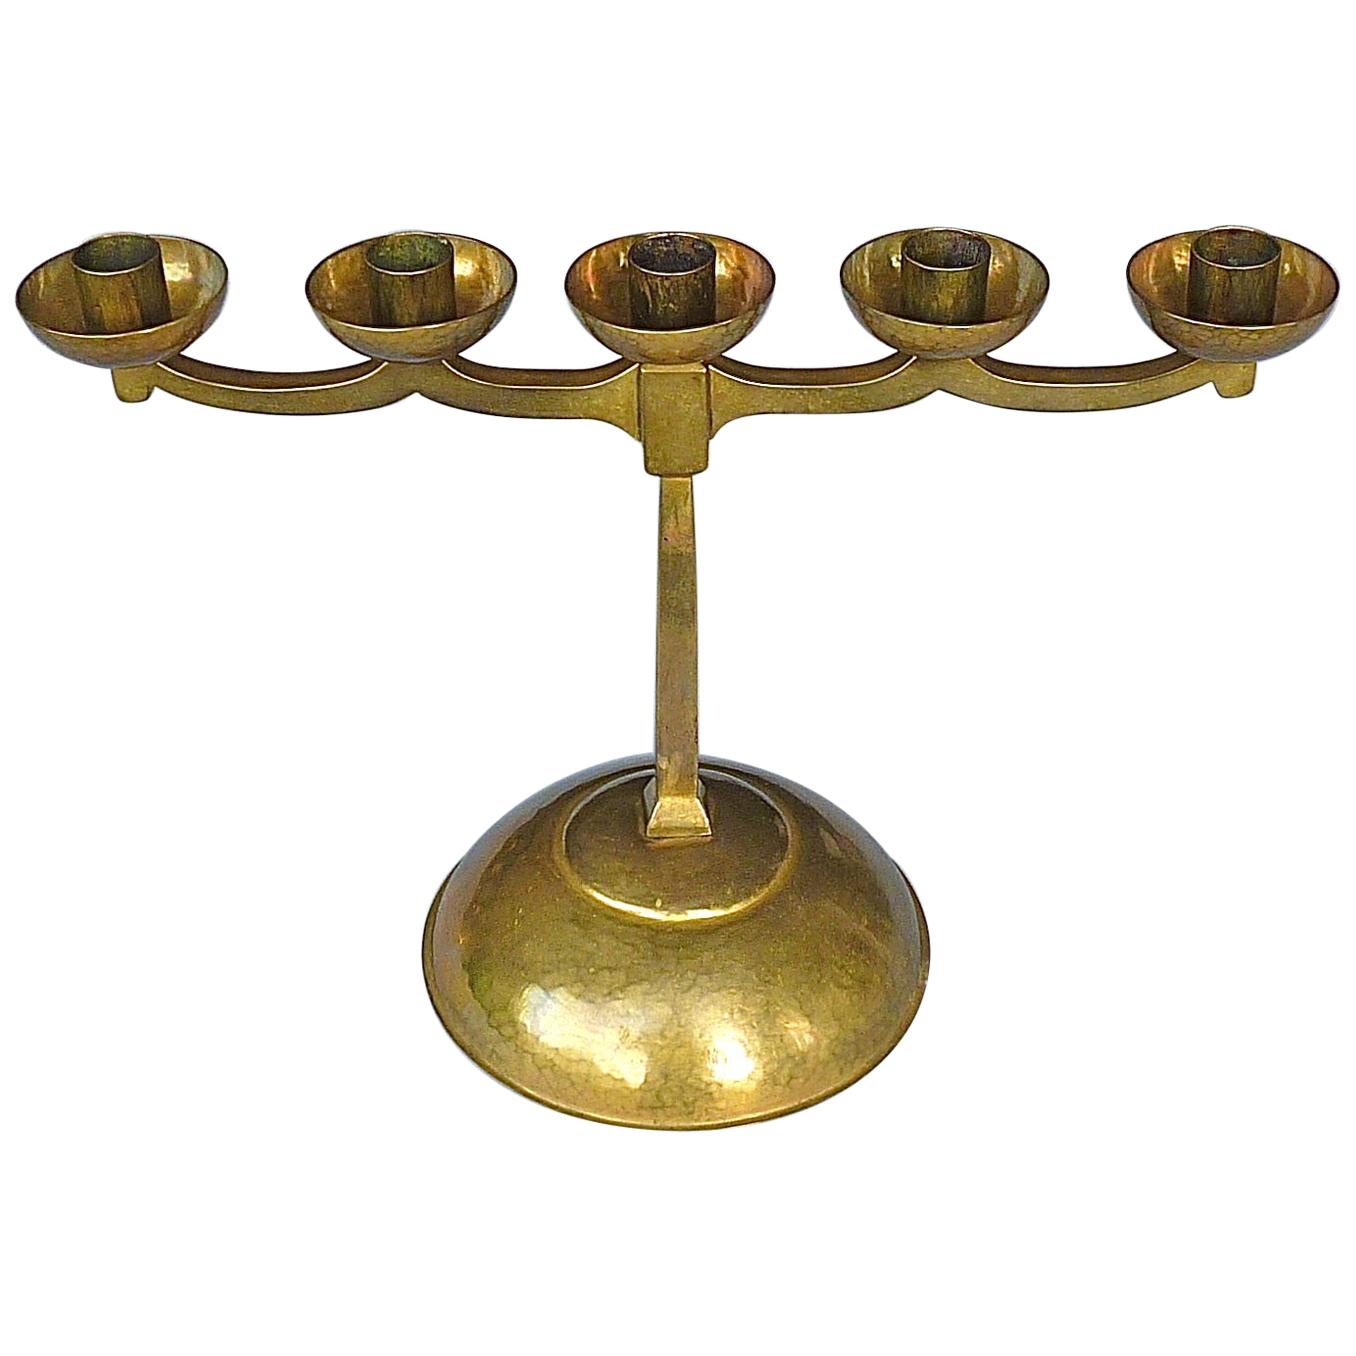 Hand-Chased Brass Bauhaus Art Deco Candle Holder Signed Bohde 1920s Candelabras For Sale